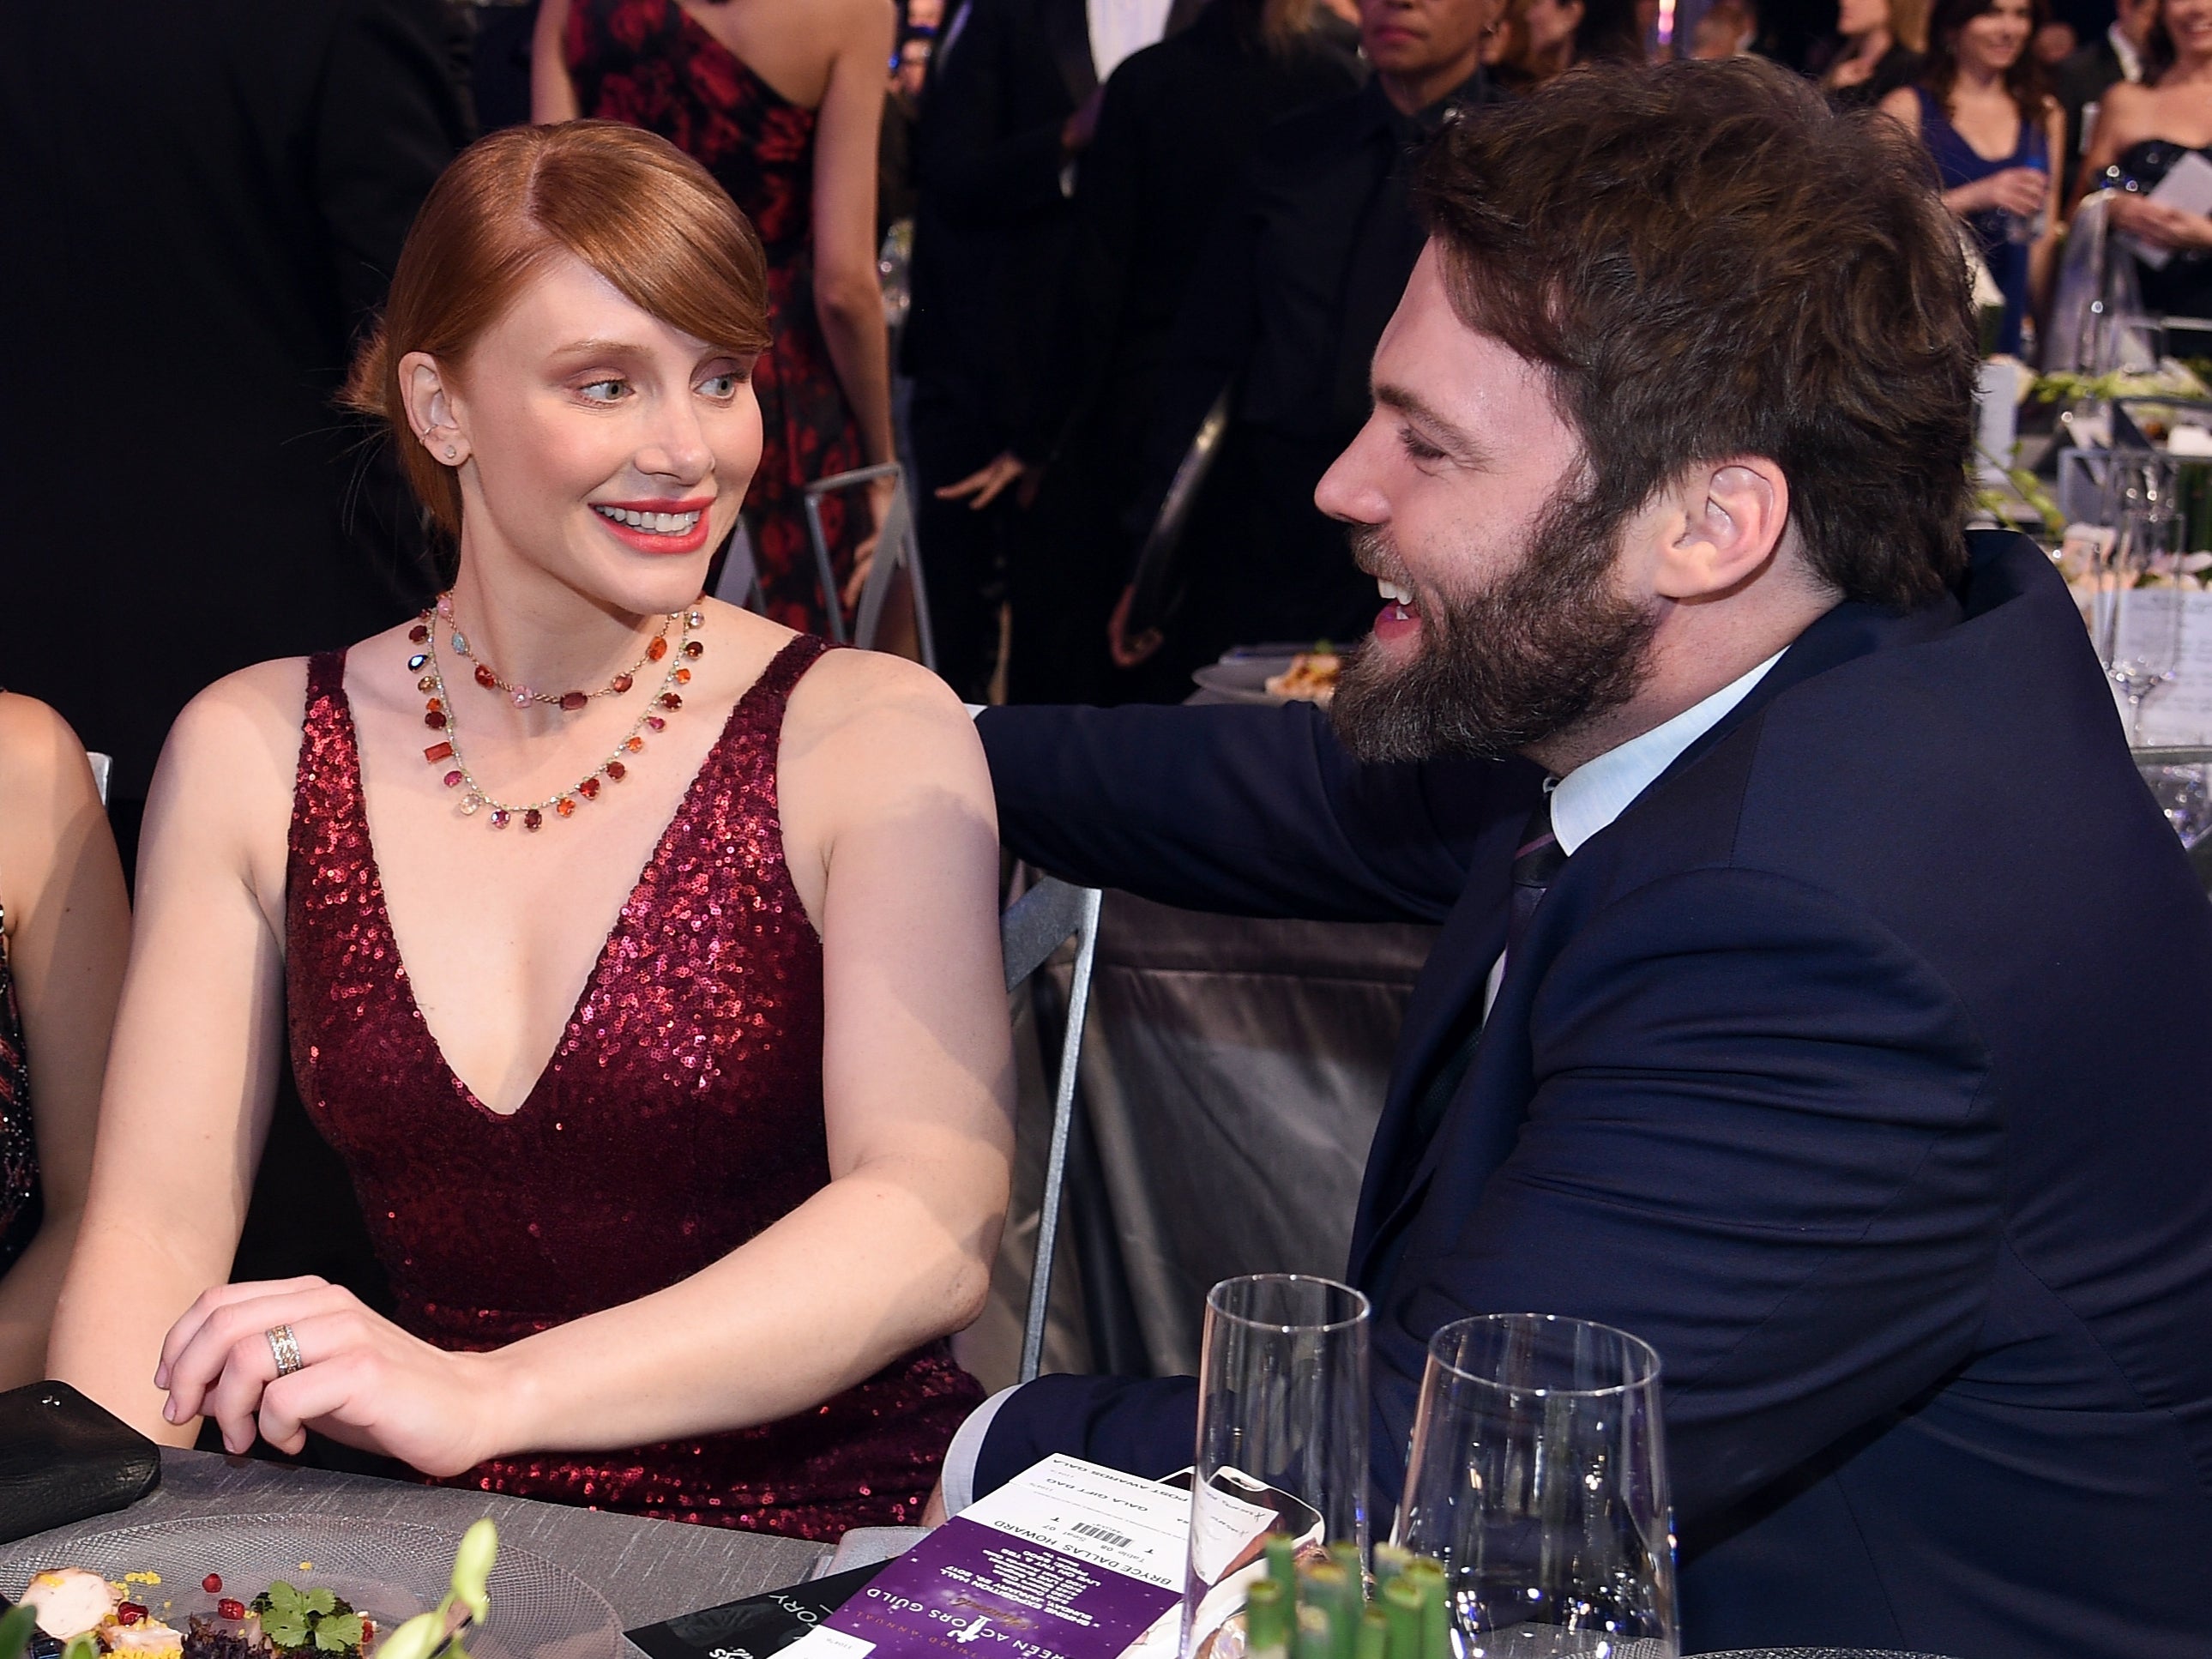 Bryce Dallas Howard, and Seth Gabel attend the 23rd Annual Screen Actors Guild Awards Cocktail Reception at The Shrine Expo Hall on 29 January 2017